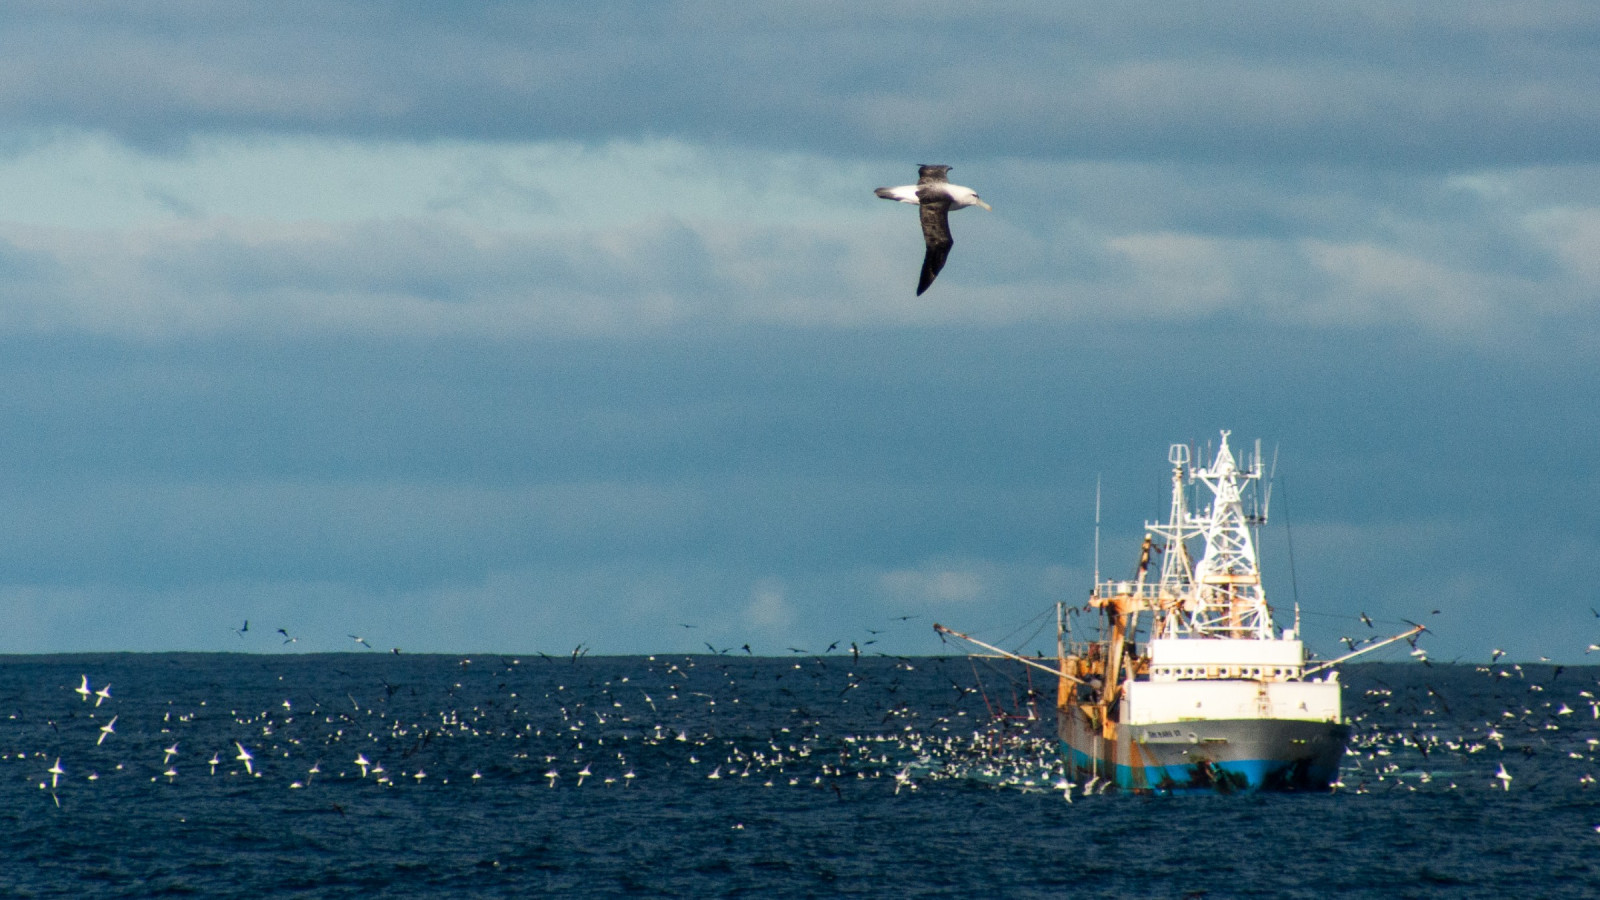 A lone fishing boat on the sea, with a flock of birds on the ocean. A bird flies across the shot in the foreground.